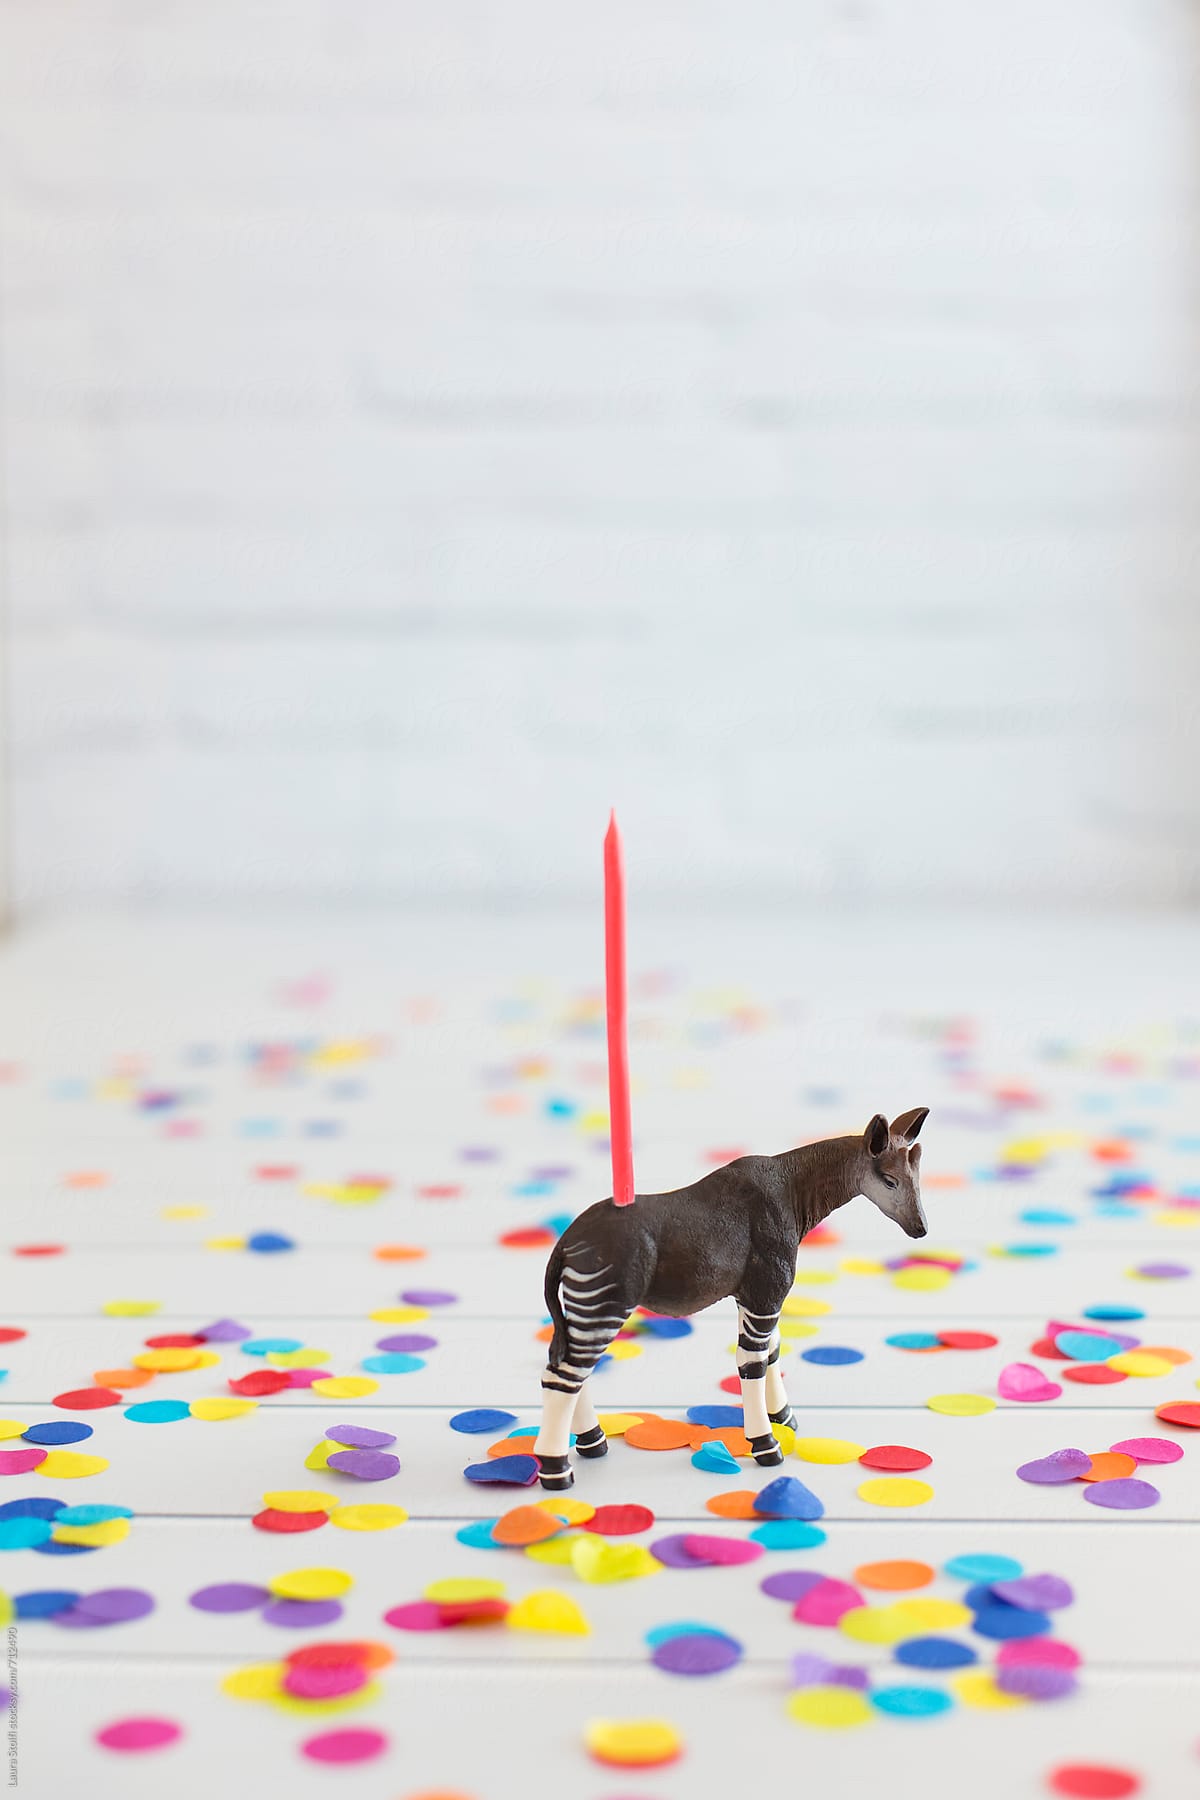 Okapi toy decorated with birthday candle standing amongst colorful confetti